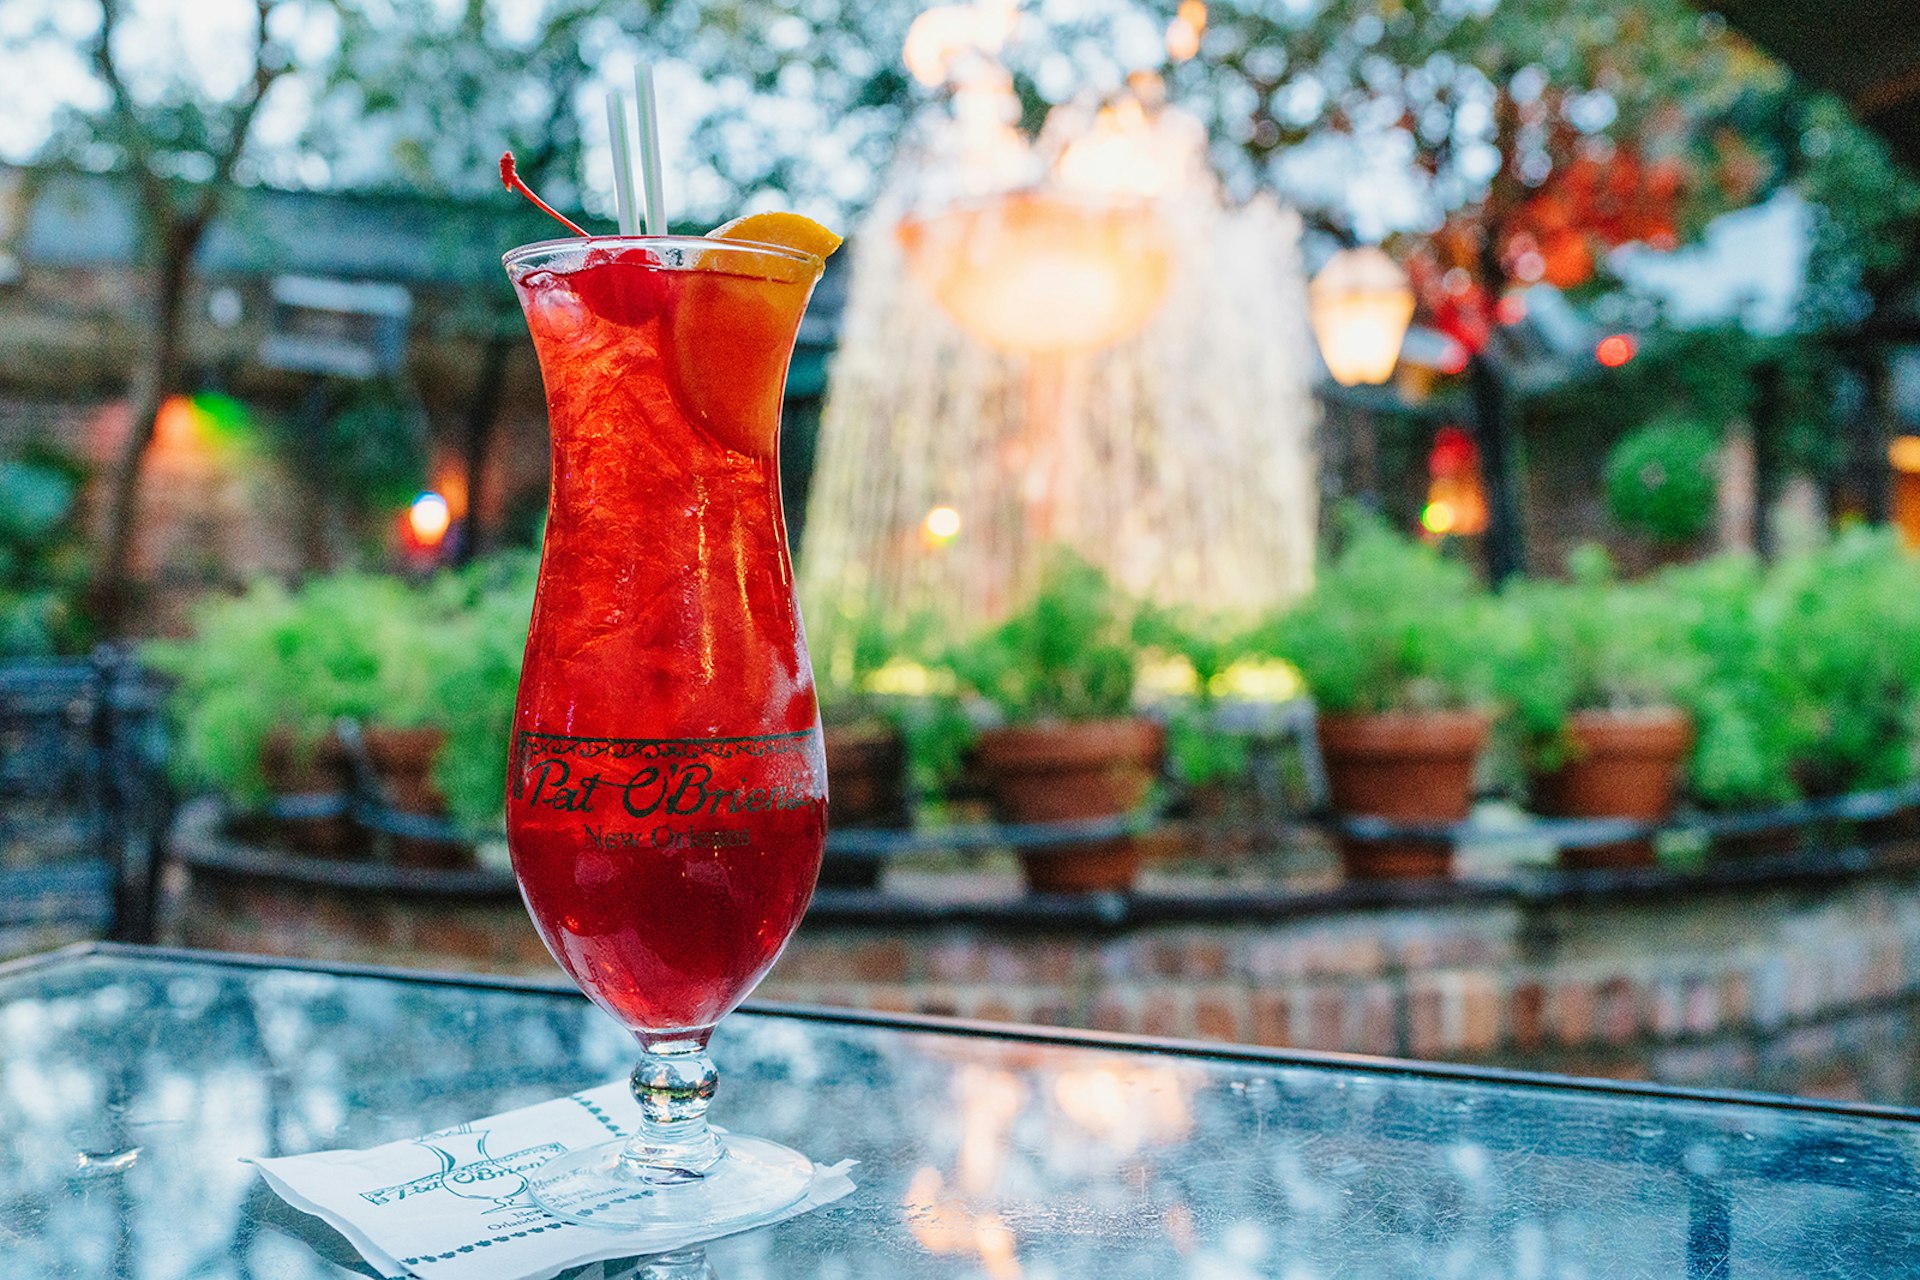 A bright red hurricane drink, served in a traditional tulip-shaped glass, on a table outdoors in a garden in the evening